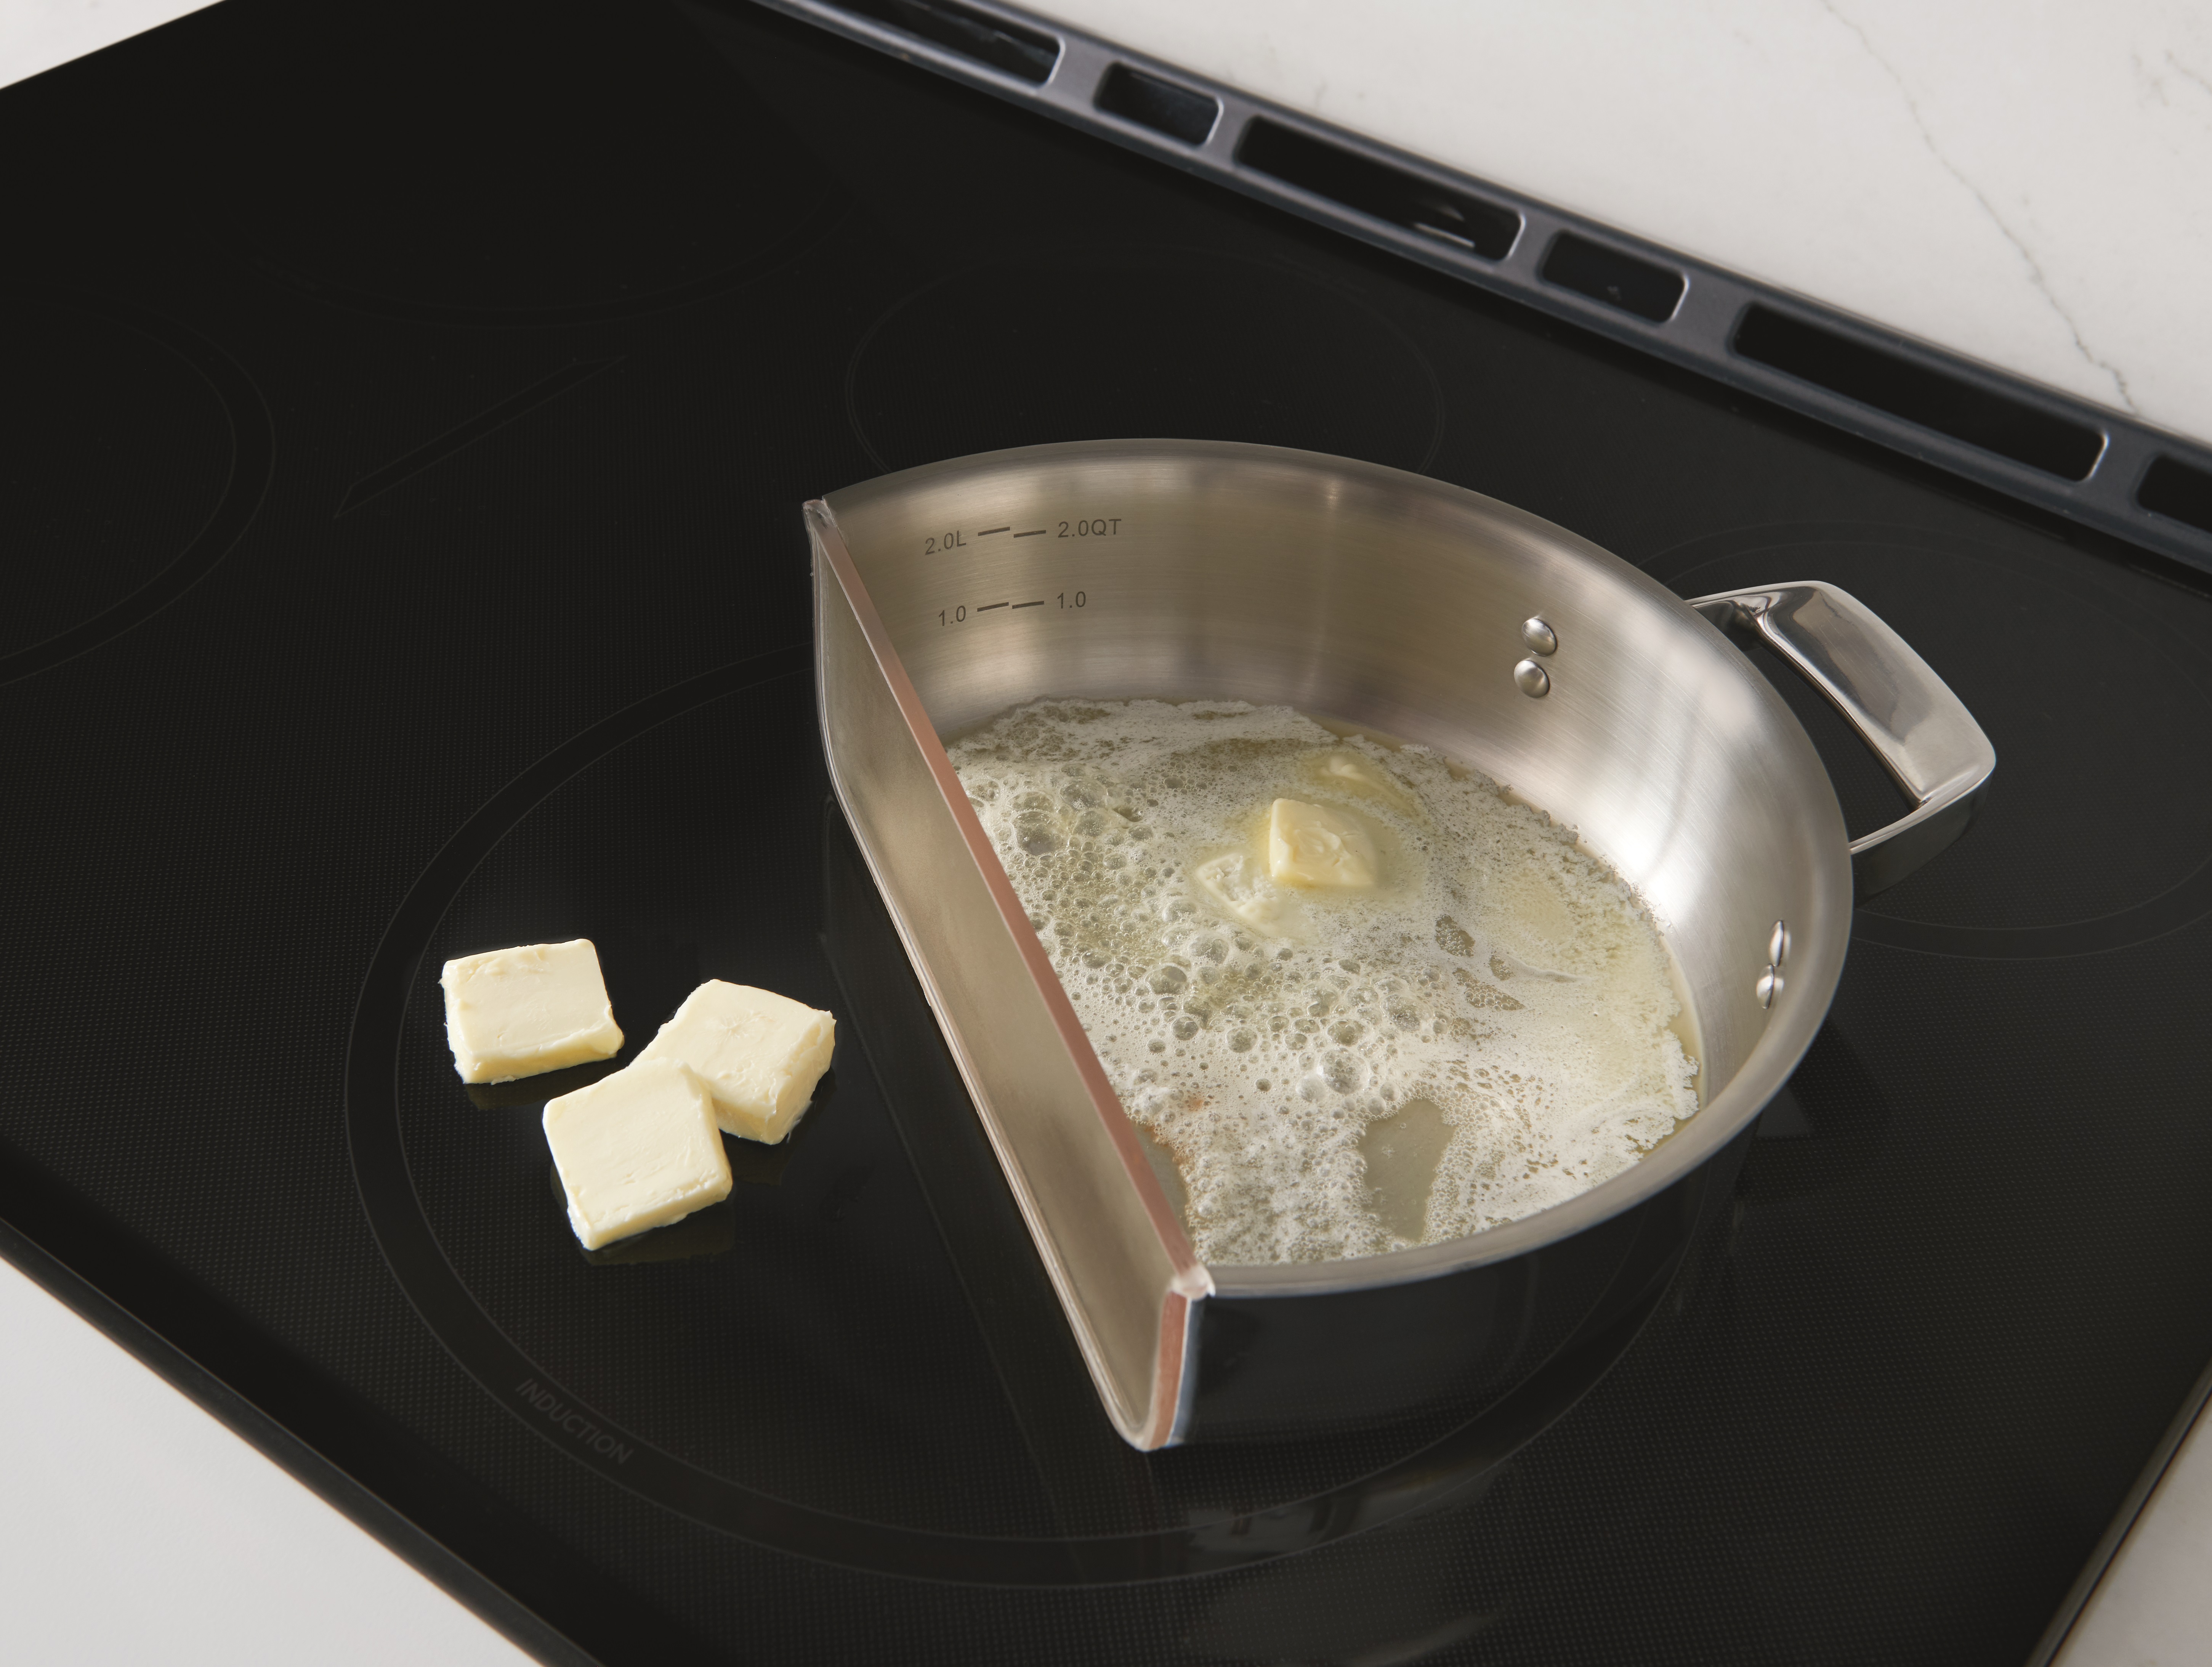 Induction cooktop is cut in half to reveal how the induction technology only heats the pan and not the surface